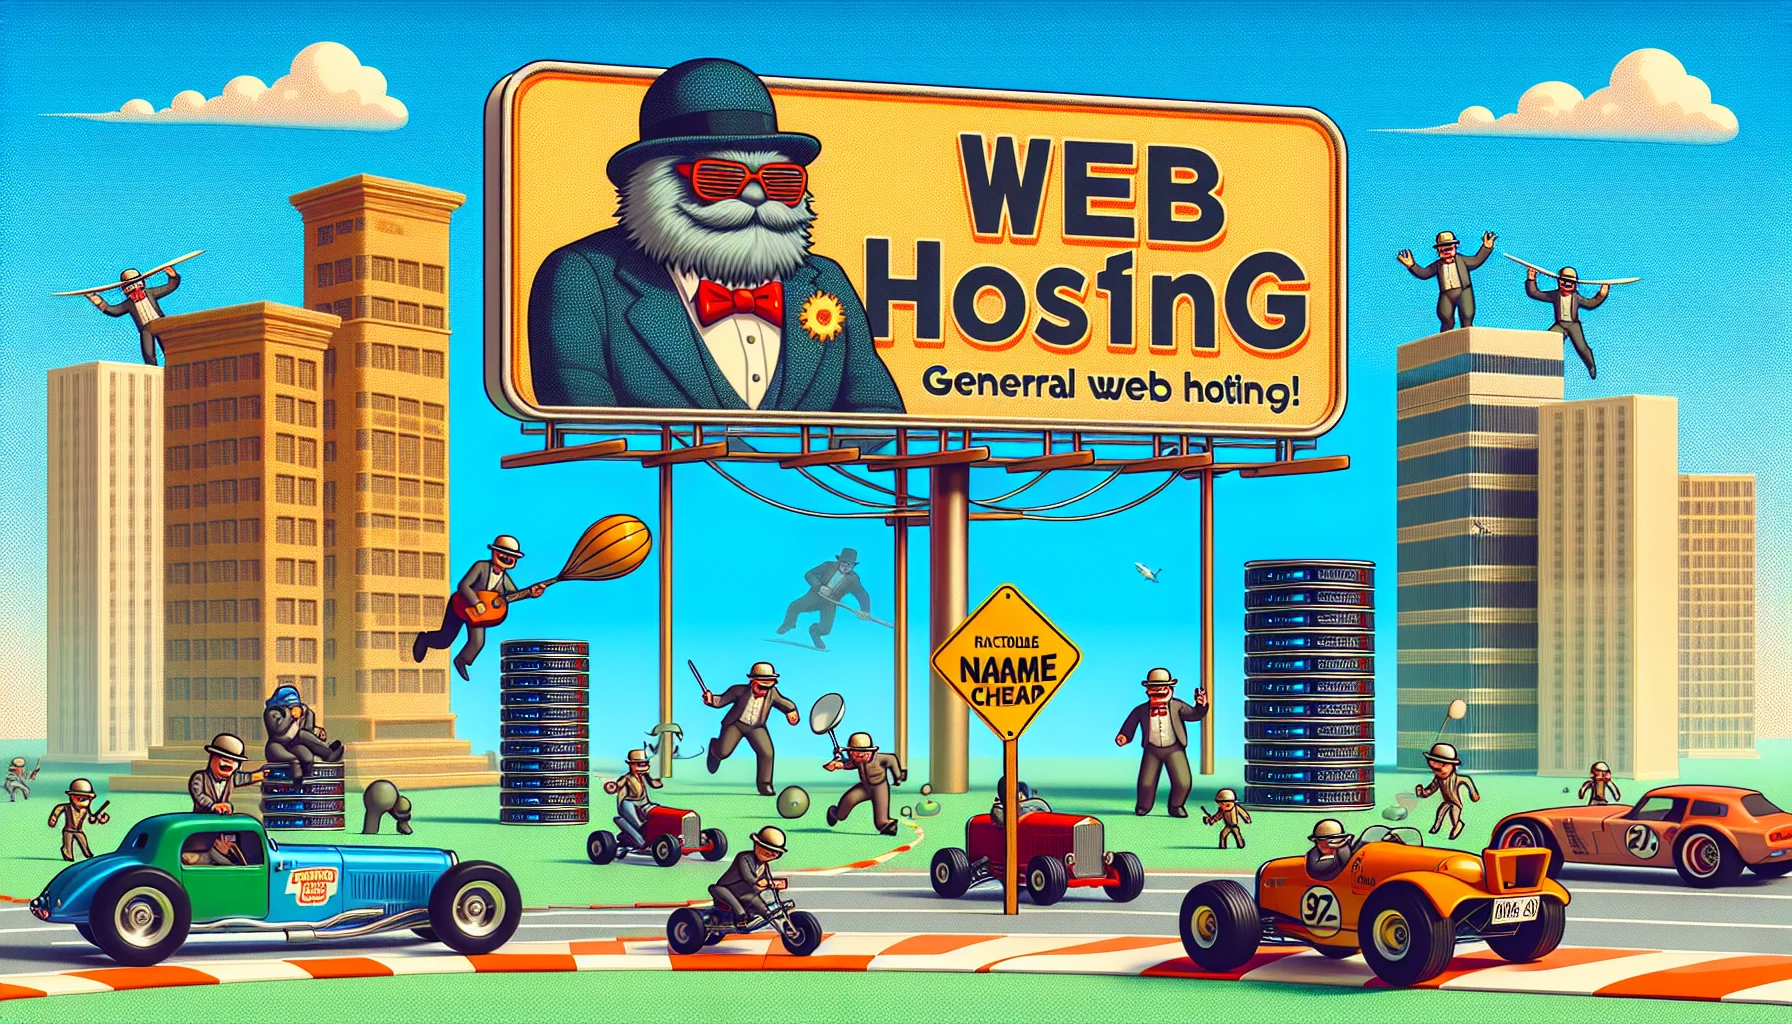 Create a humorous, playful image showcasing a general web hosting scenario. The scene could be set in a digital world, with comic-style illustrations of servers (to represent web hosting) engaging in fun activities like racing or playing musical instruments. A mammoth, vintage billboard prominently showcasing the word 'Name Cheap' stands on a side to hint at affordable web hosting. Lastly, sprinkle some fun elements like server mascots wearing bowler hats, sunglasses, or bow ties walking about. It's a lively, entertaining scenario promoting web hosting.